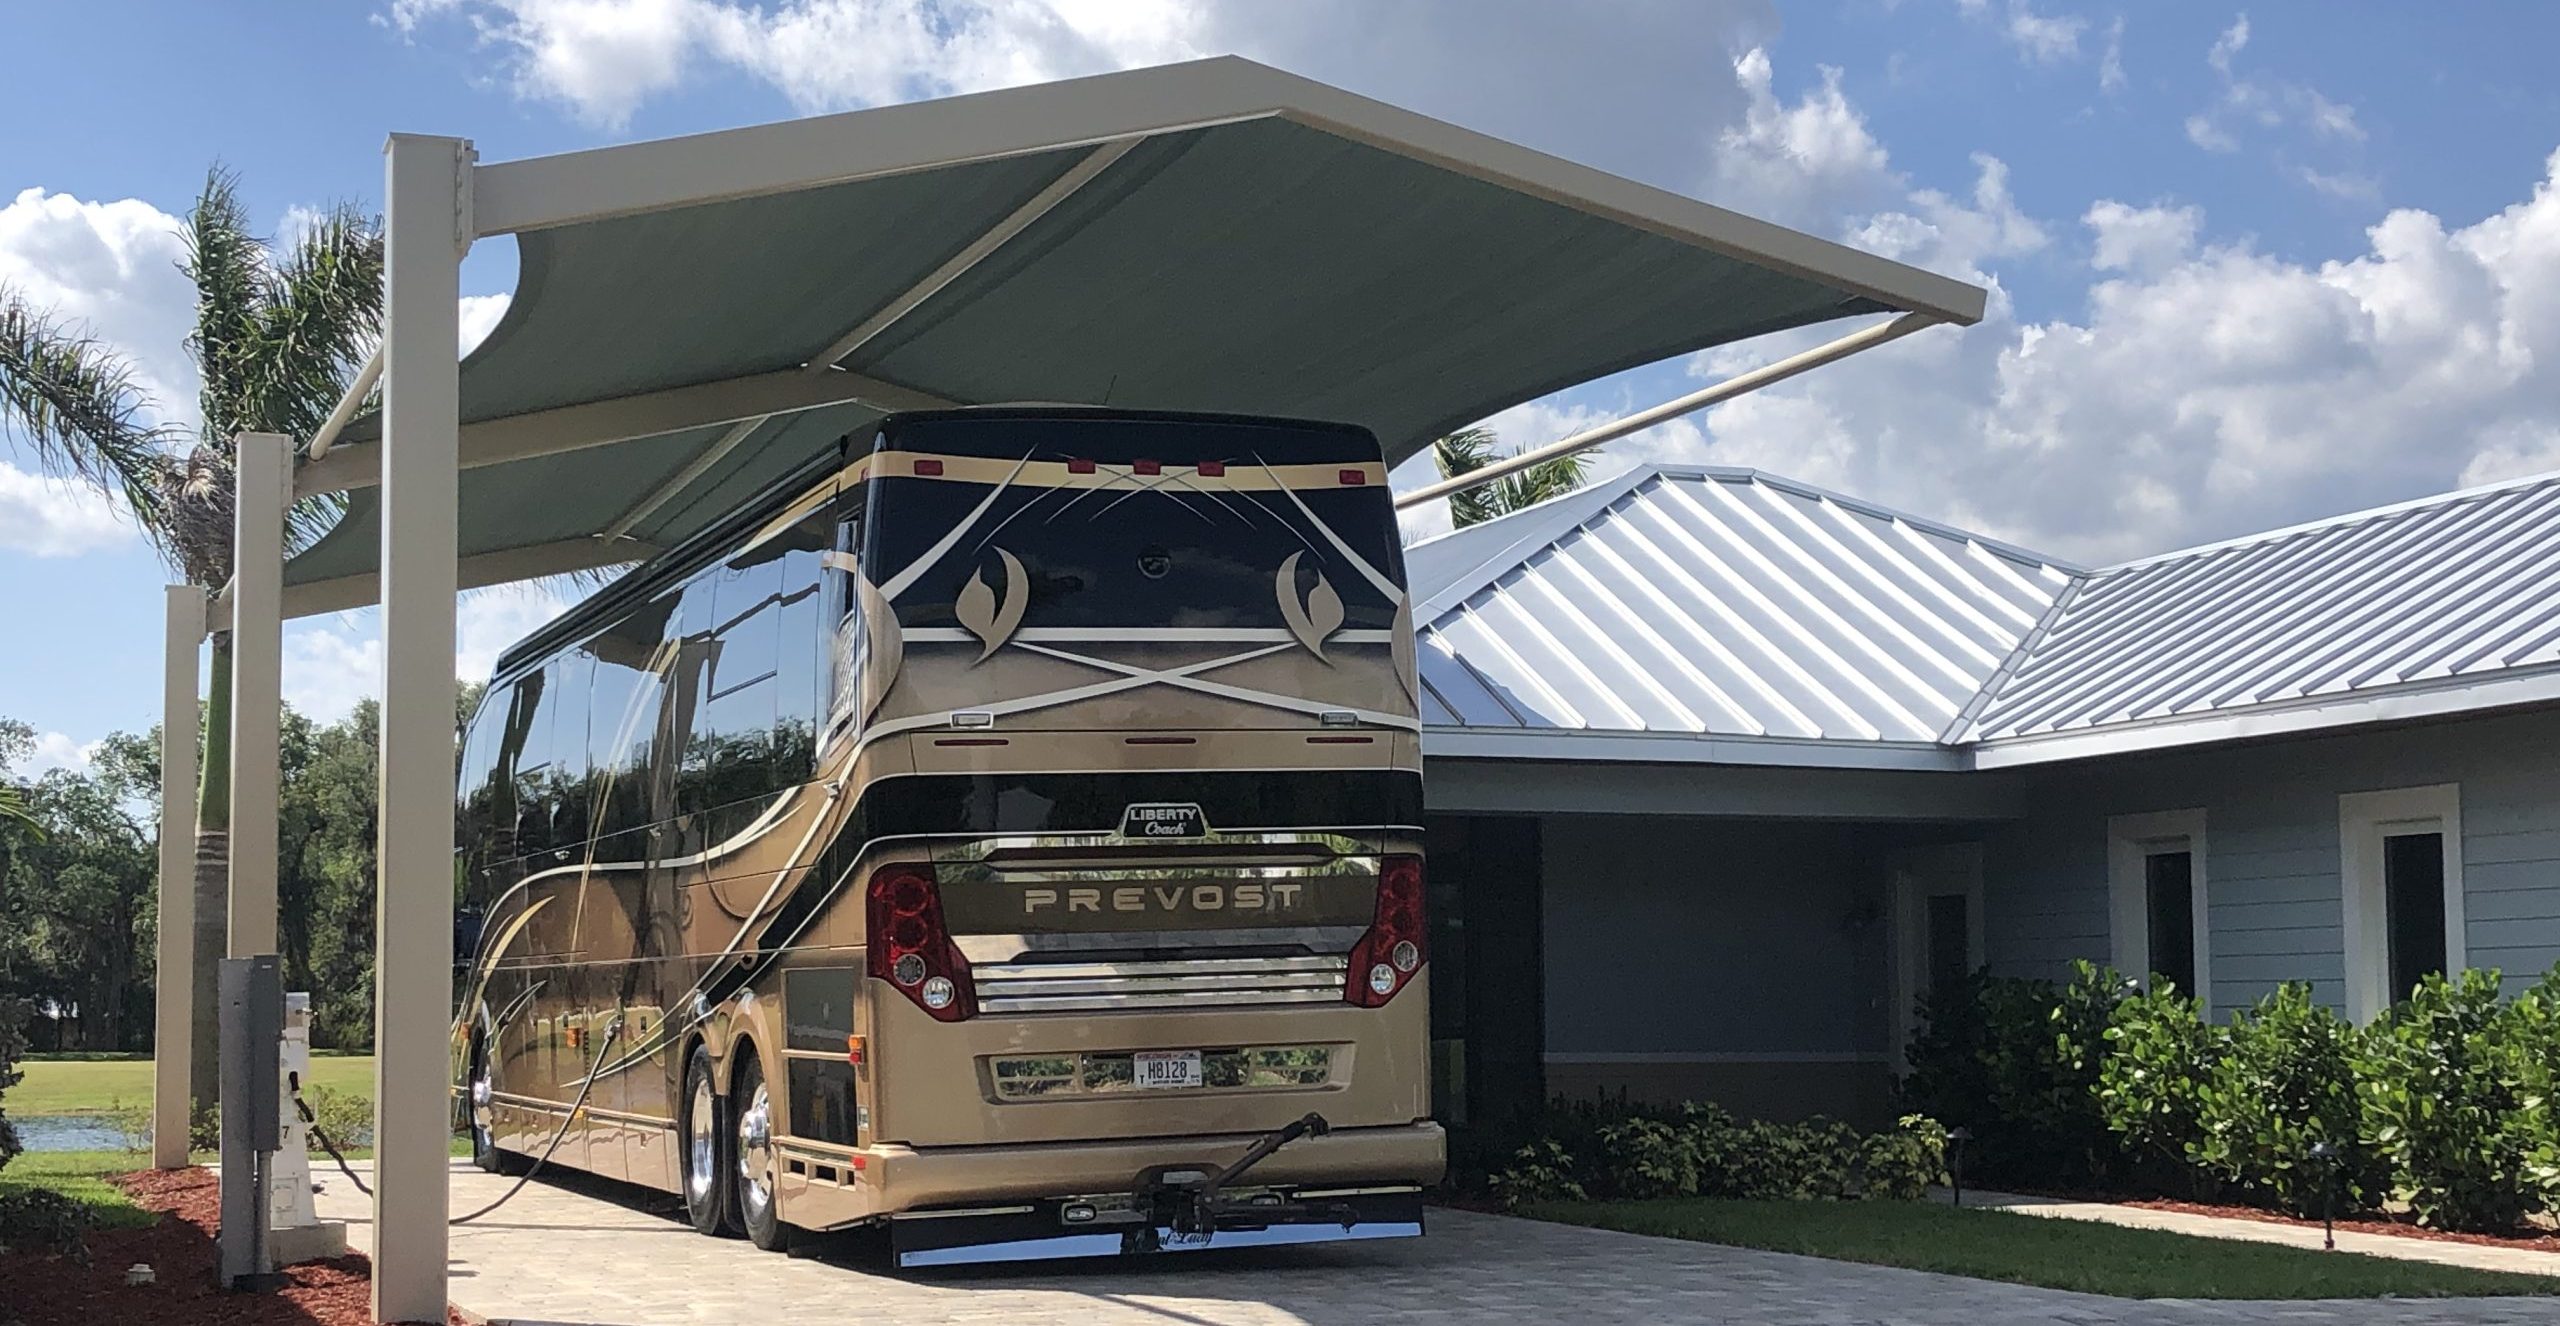 shade cover over house covering a bus